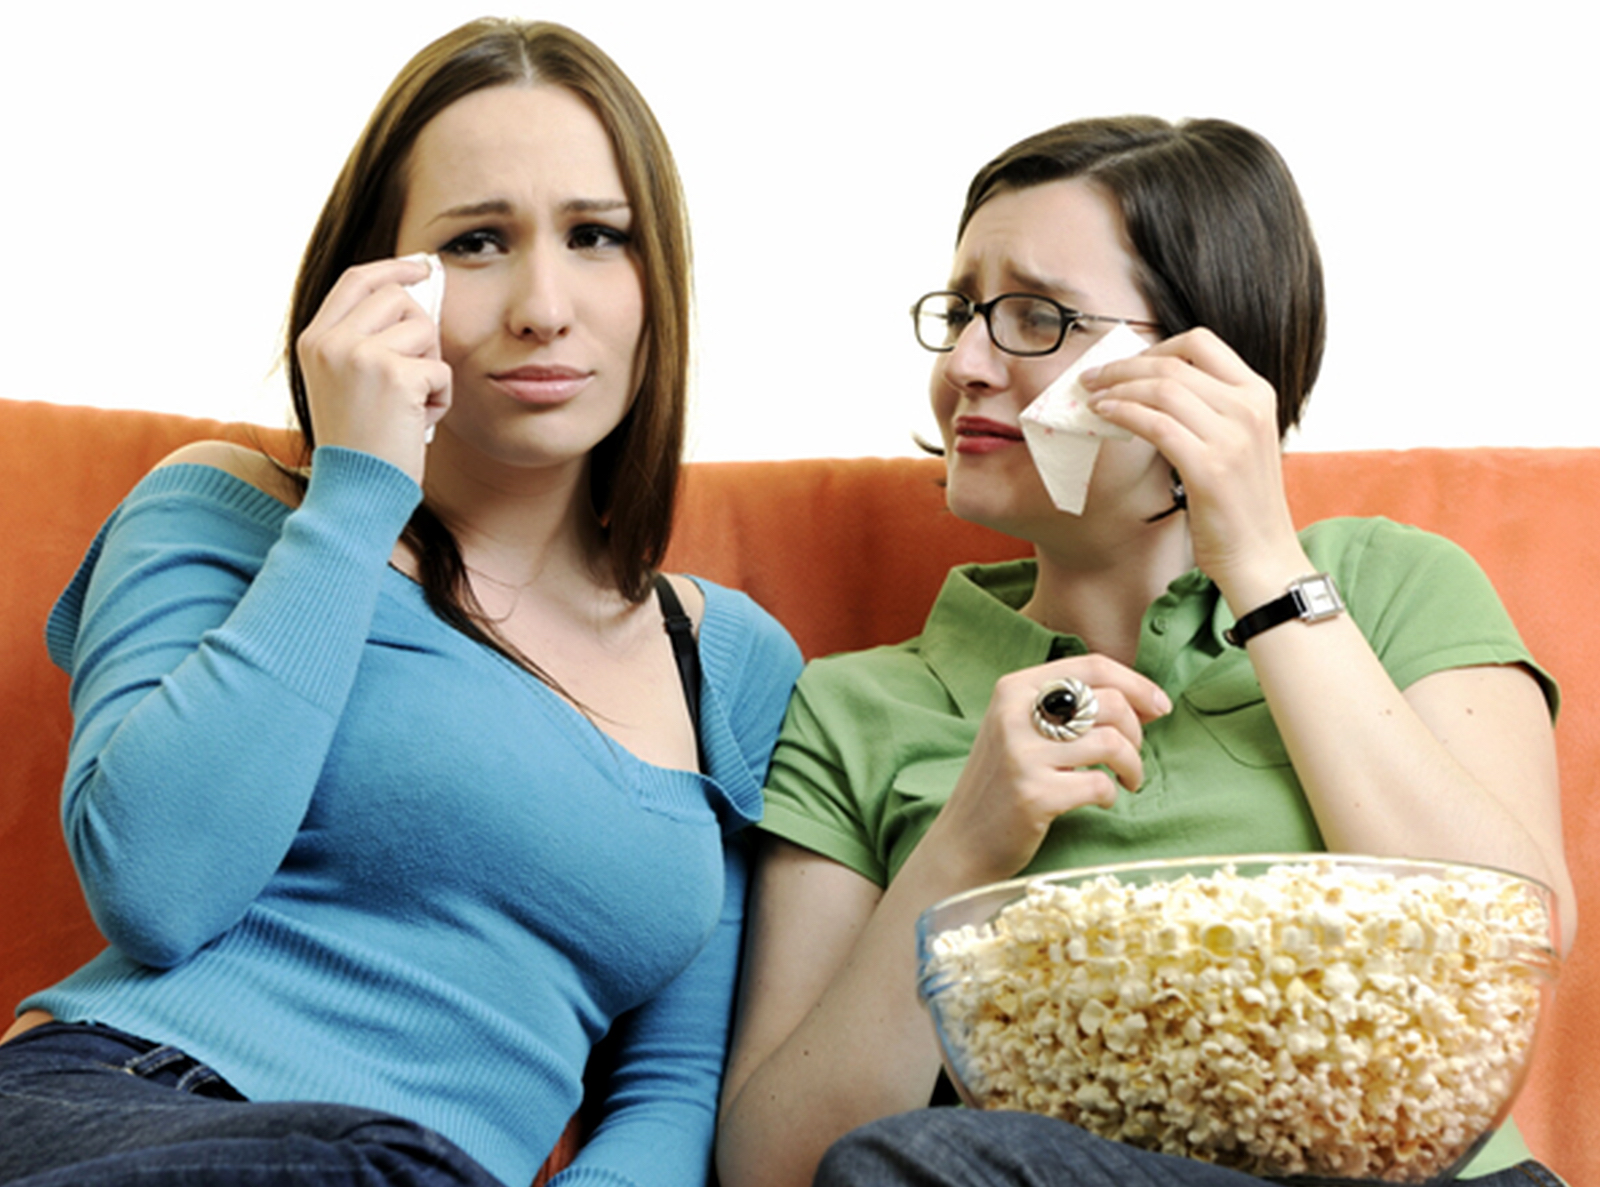 Are You an Empath? person crying at movie